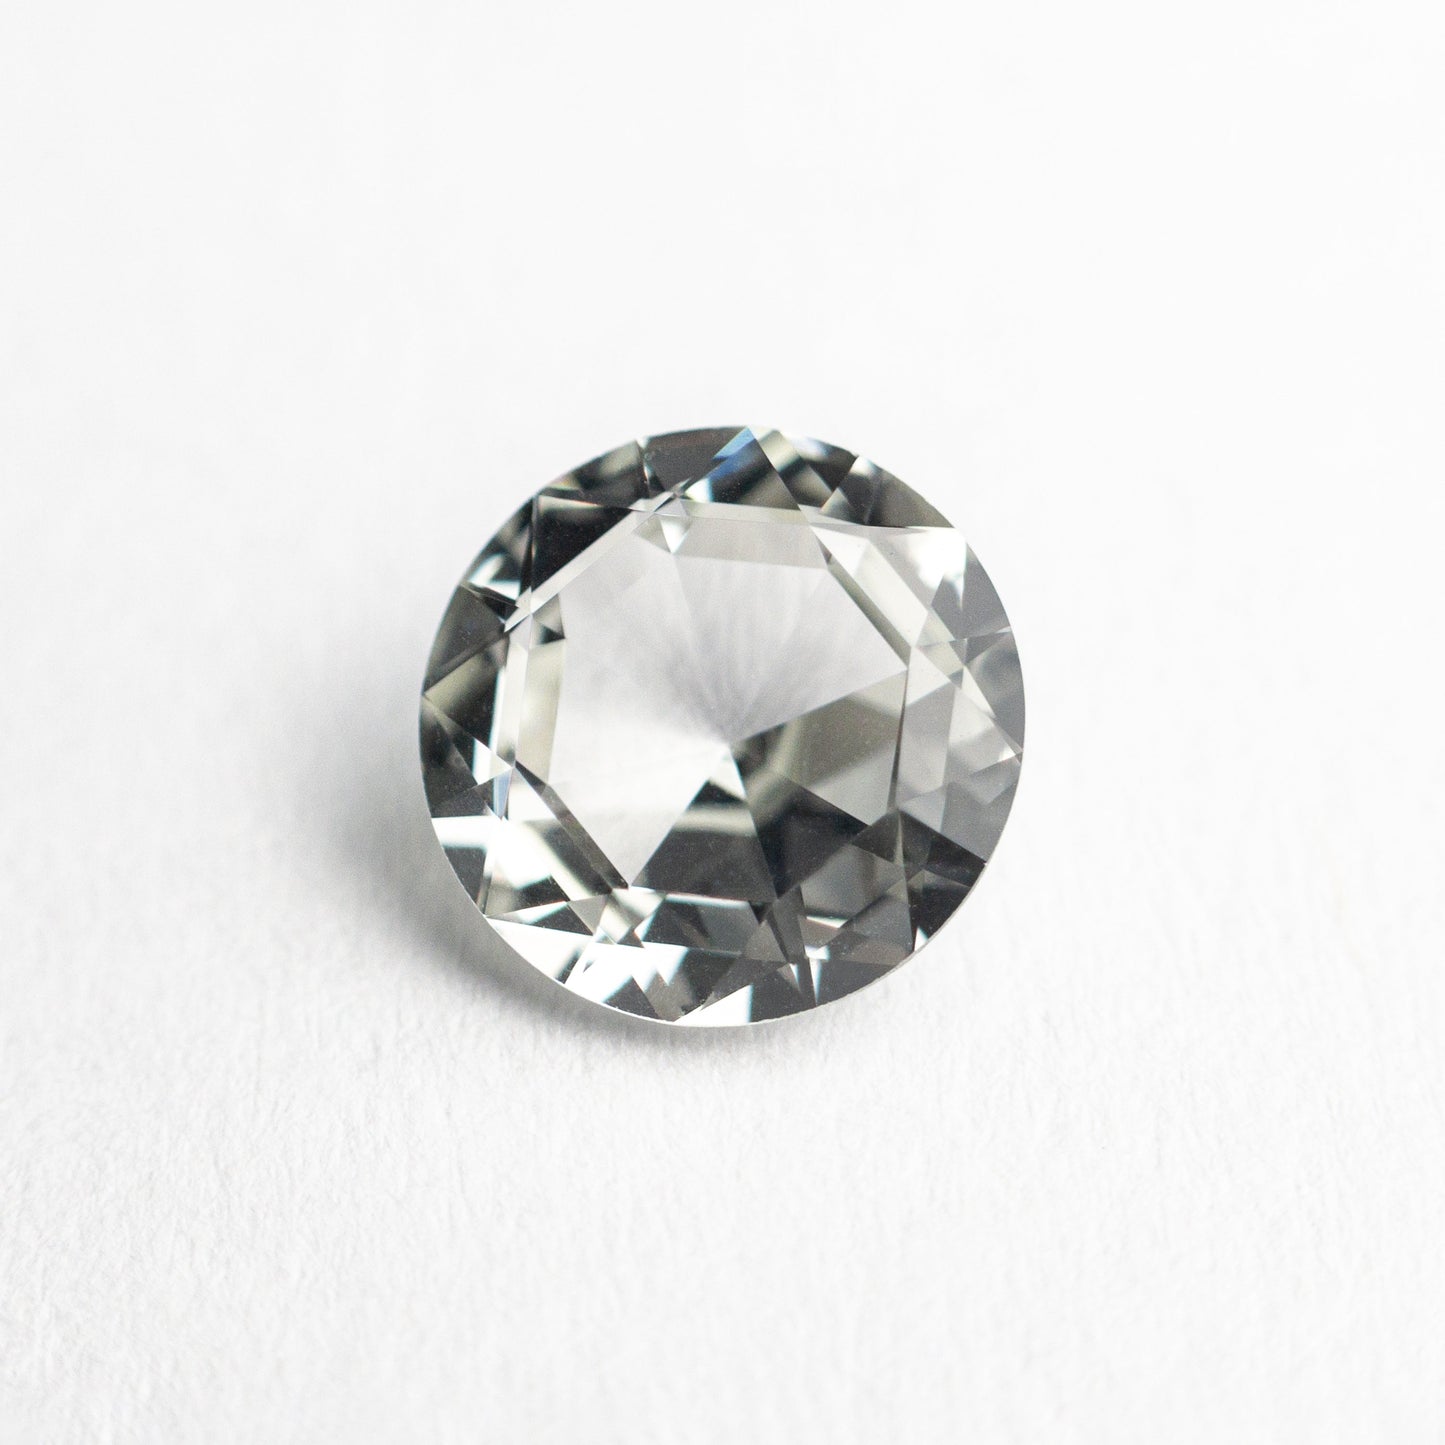 1.42ct 7.04x7.02x3.55mm Round Double Cut Sapphire 22306-09